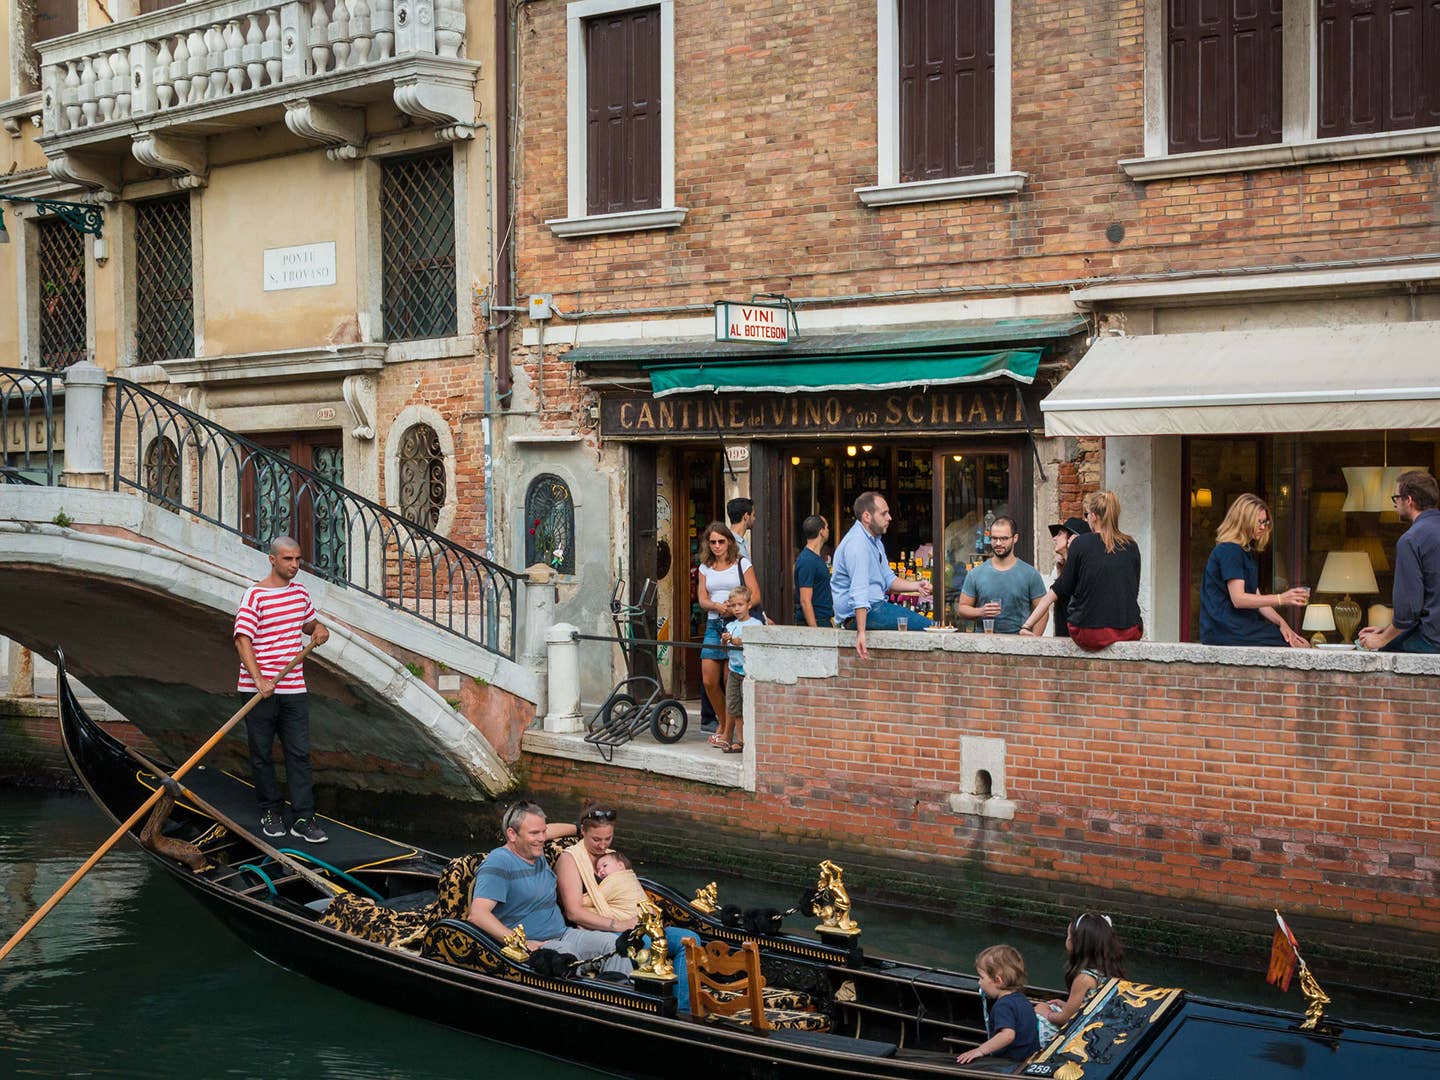 How to Drink Wine in Venice Like a Local